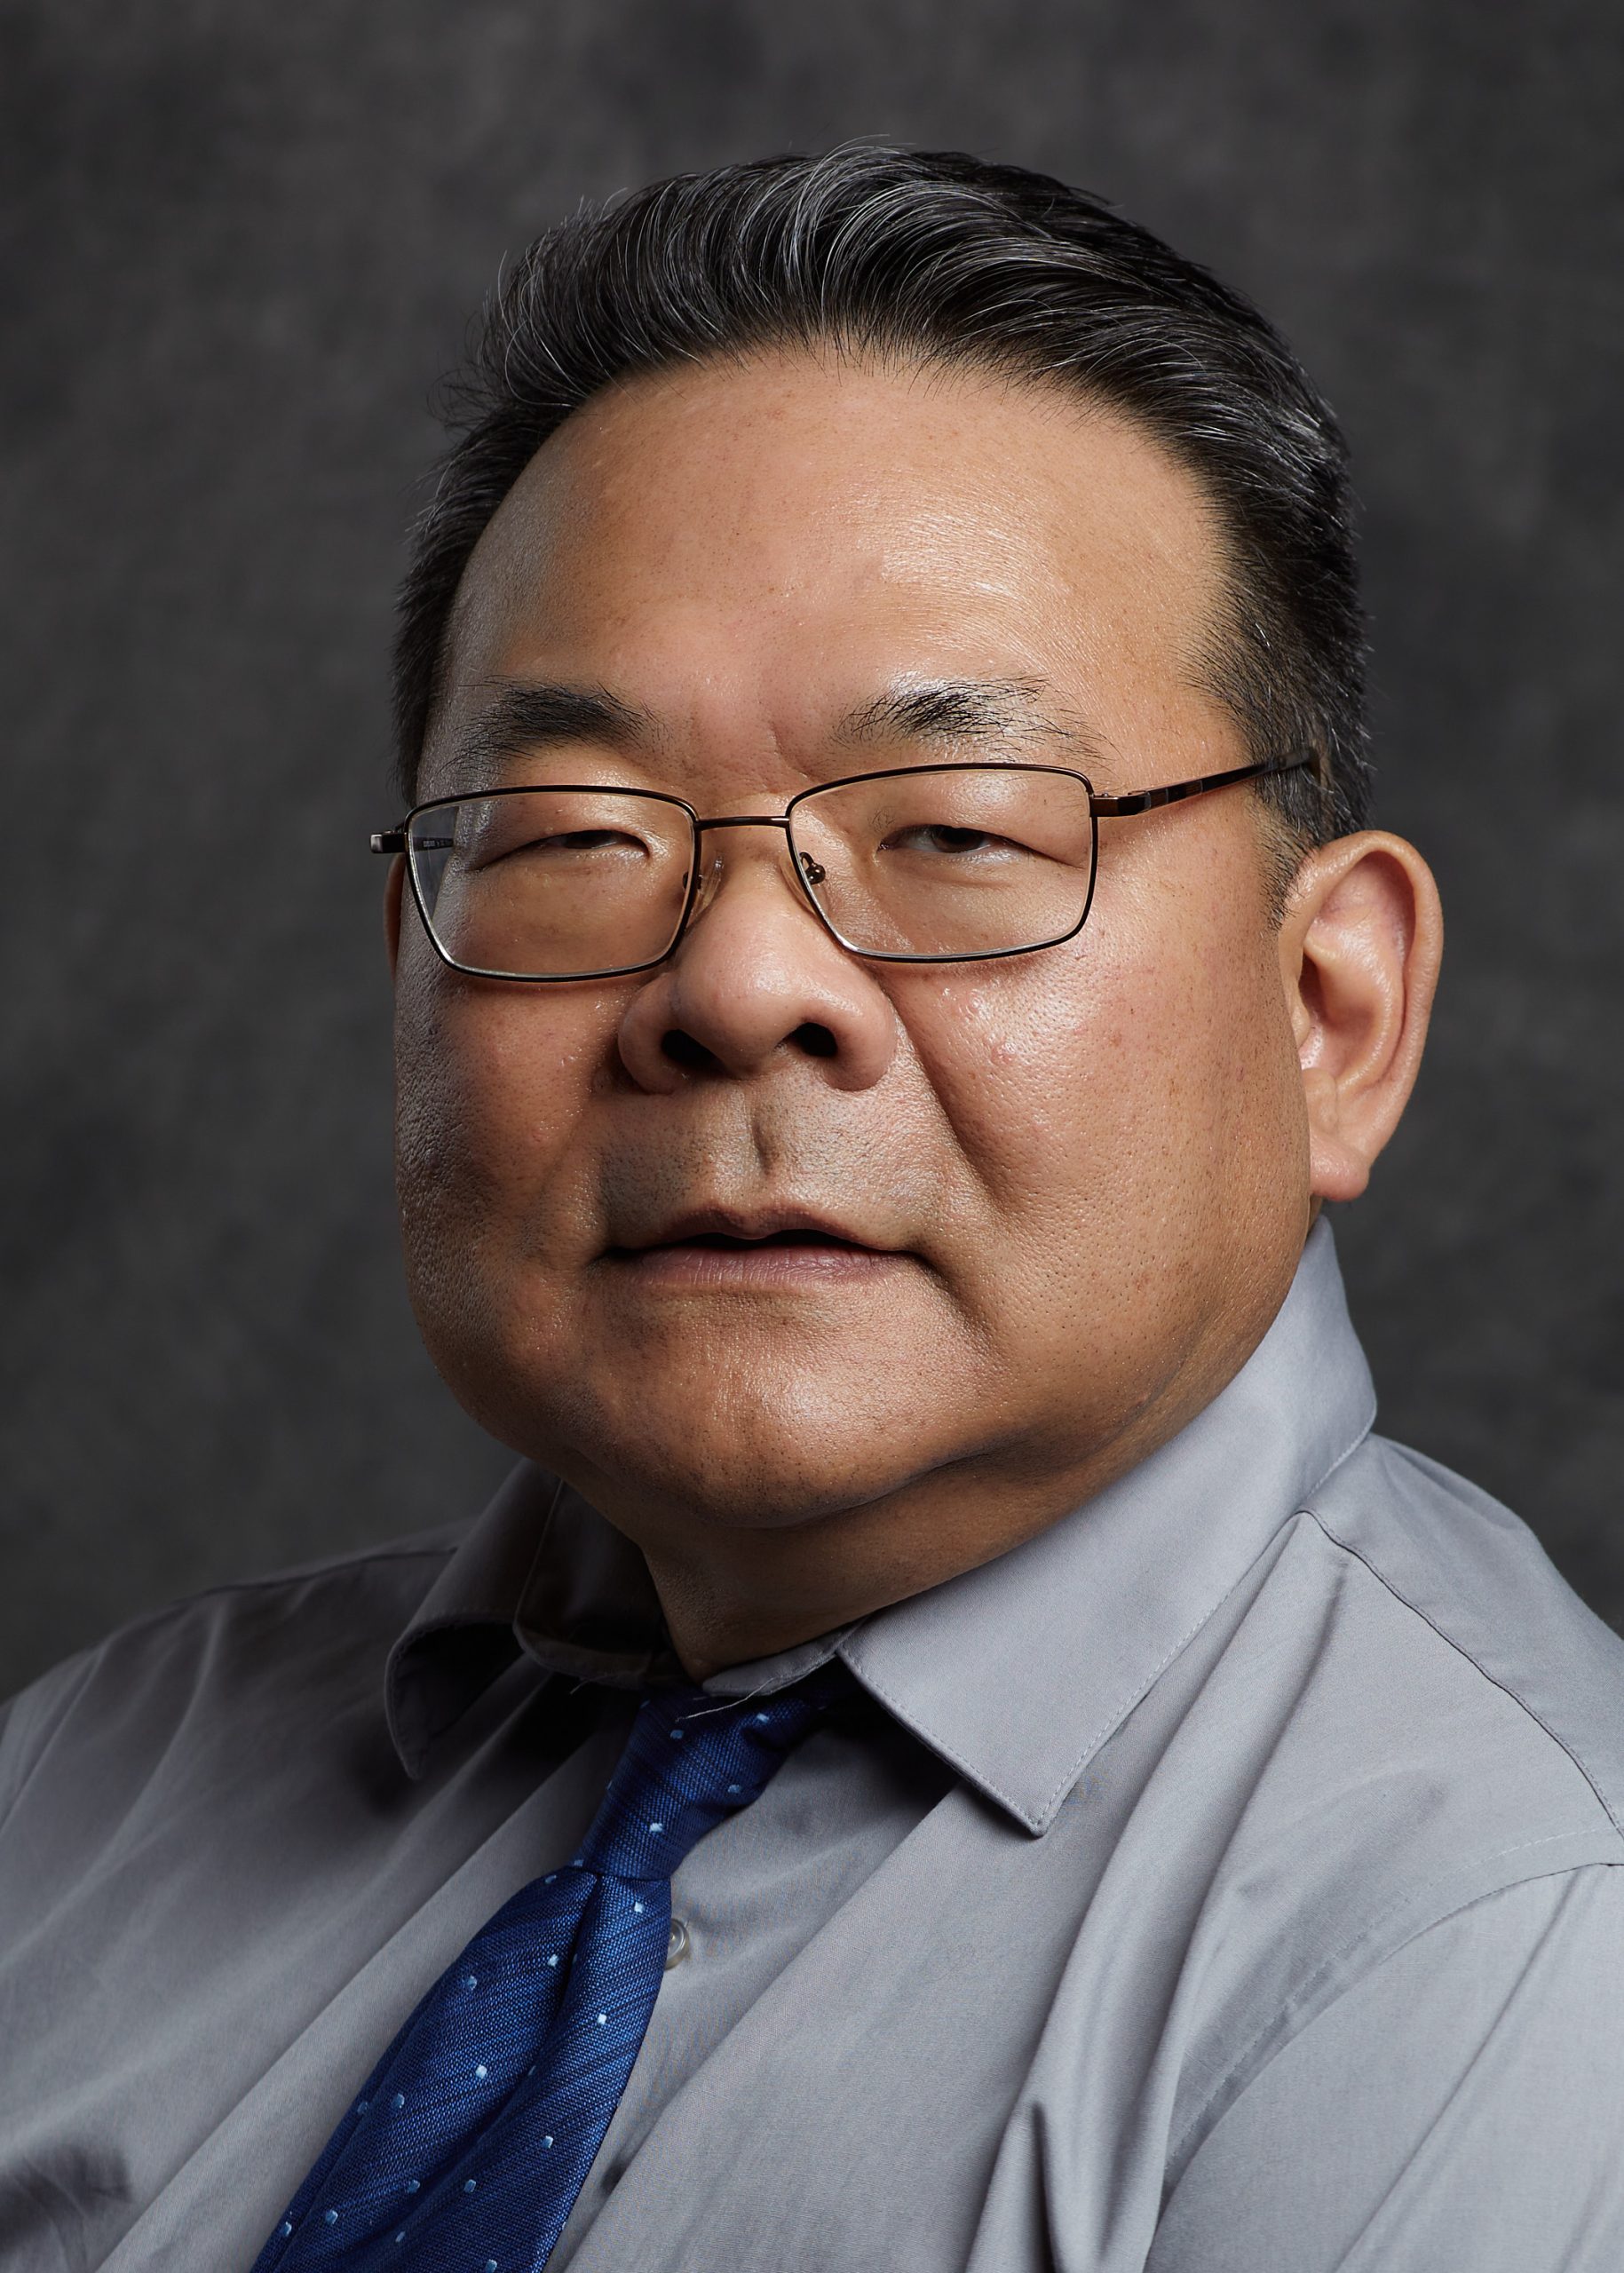 Ronald Kawauchi, MD - An Employed Provider of Memorial Healthcare